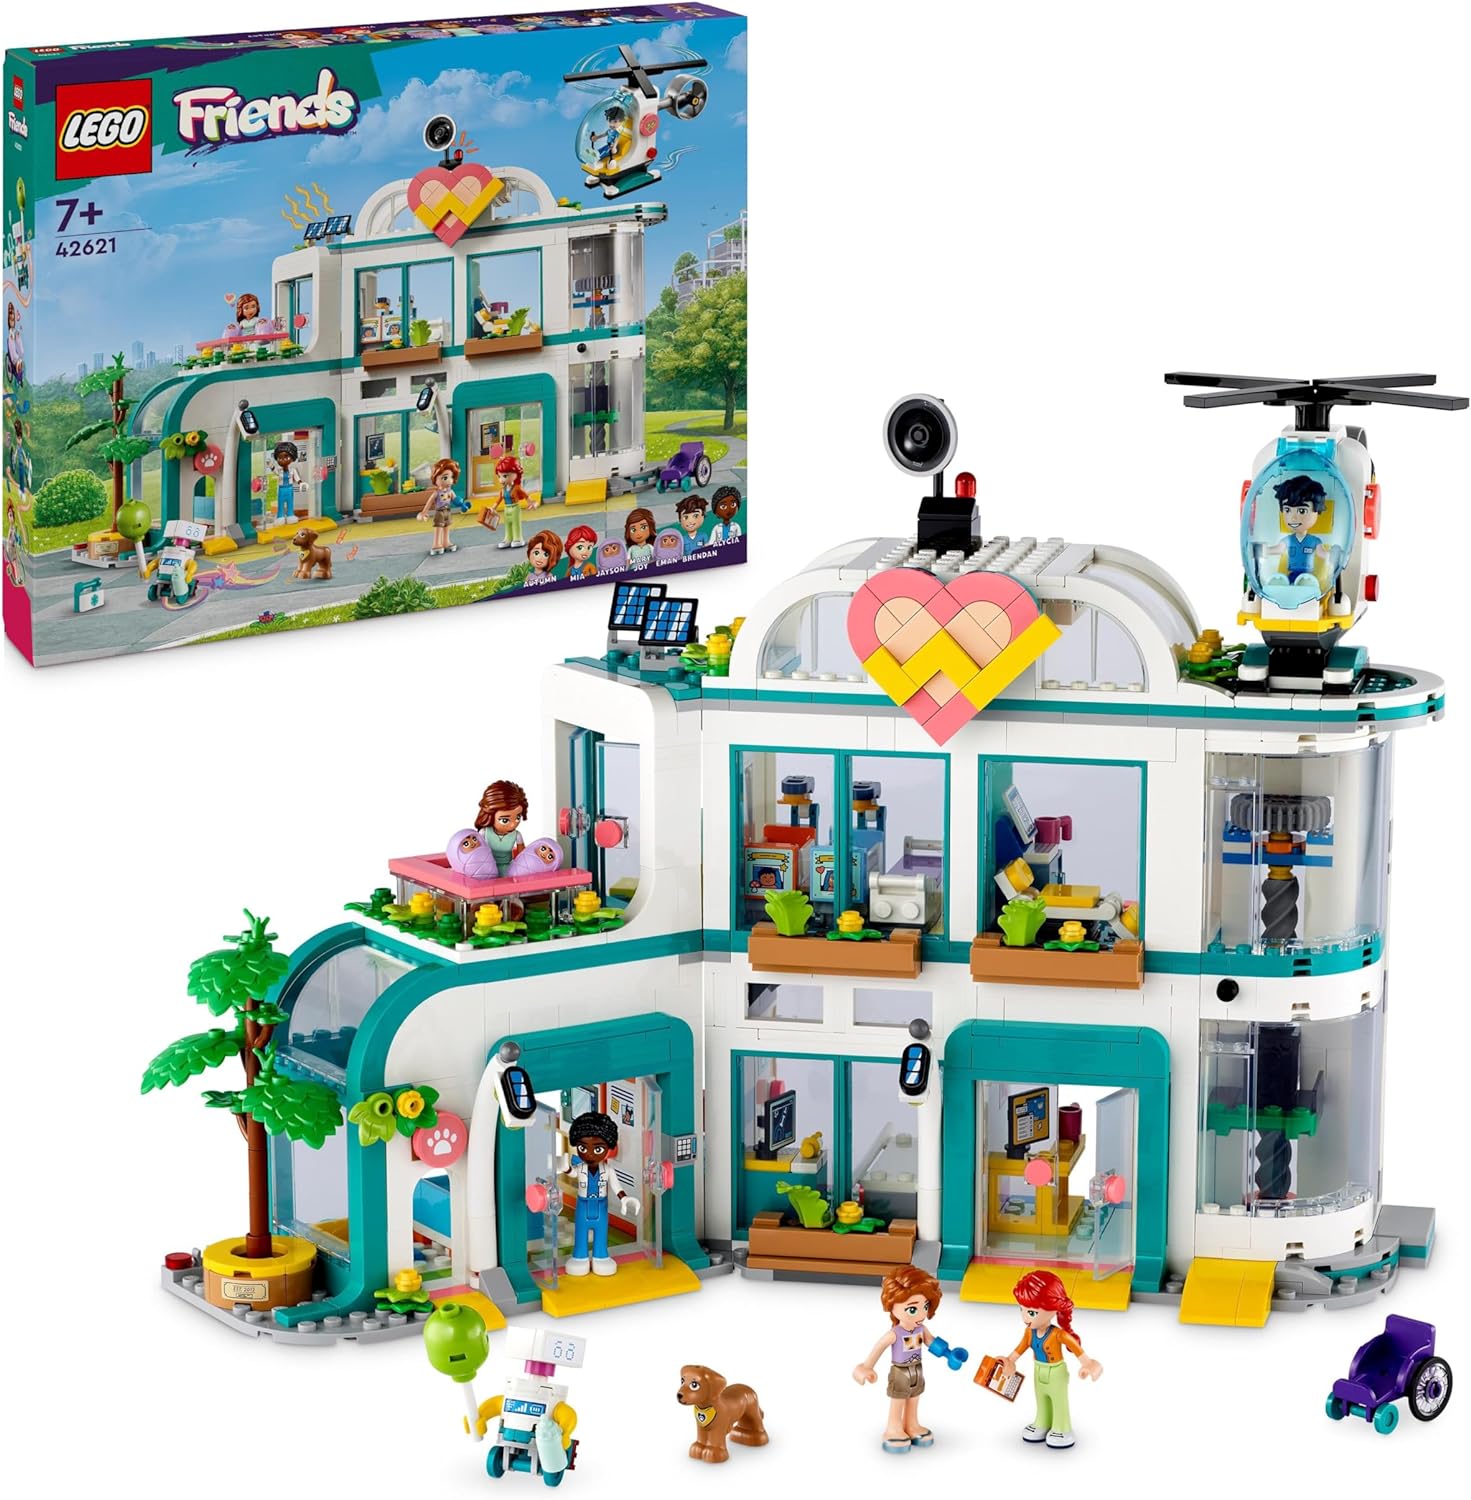 LEGO Friends Heartlake City Hospital, Set with Toy Helicopter and Figures Including Autumn and Dog, Doctor Toy for Children, Gift for Girls and Boys from 7 Years 42621